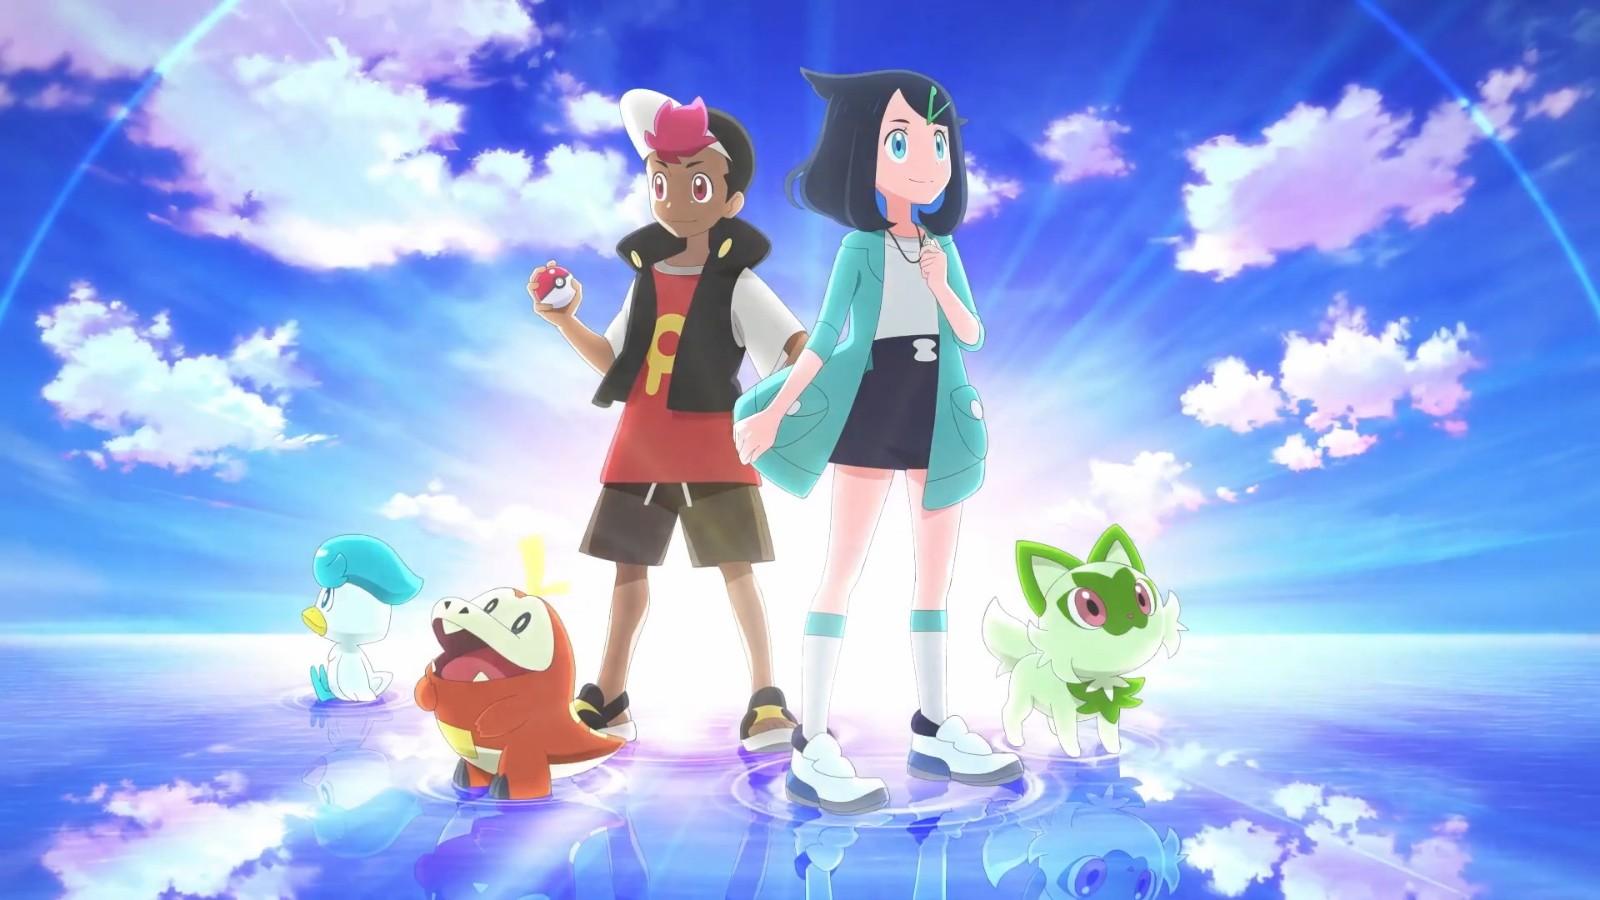 Official image from Pokemon Horizons